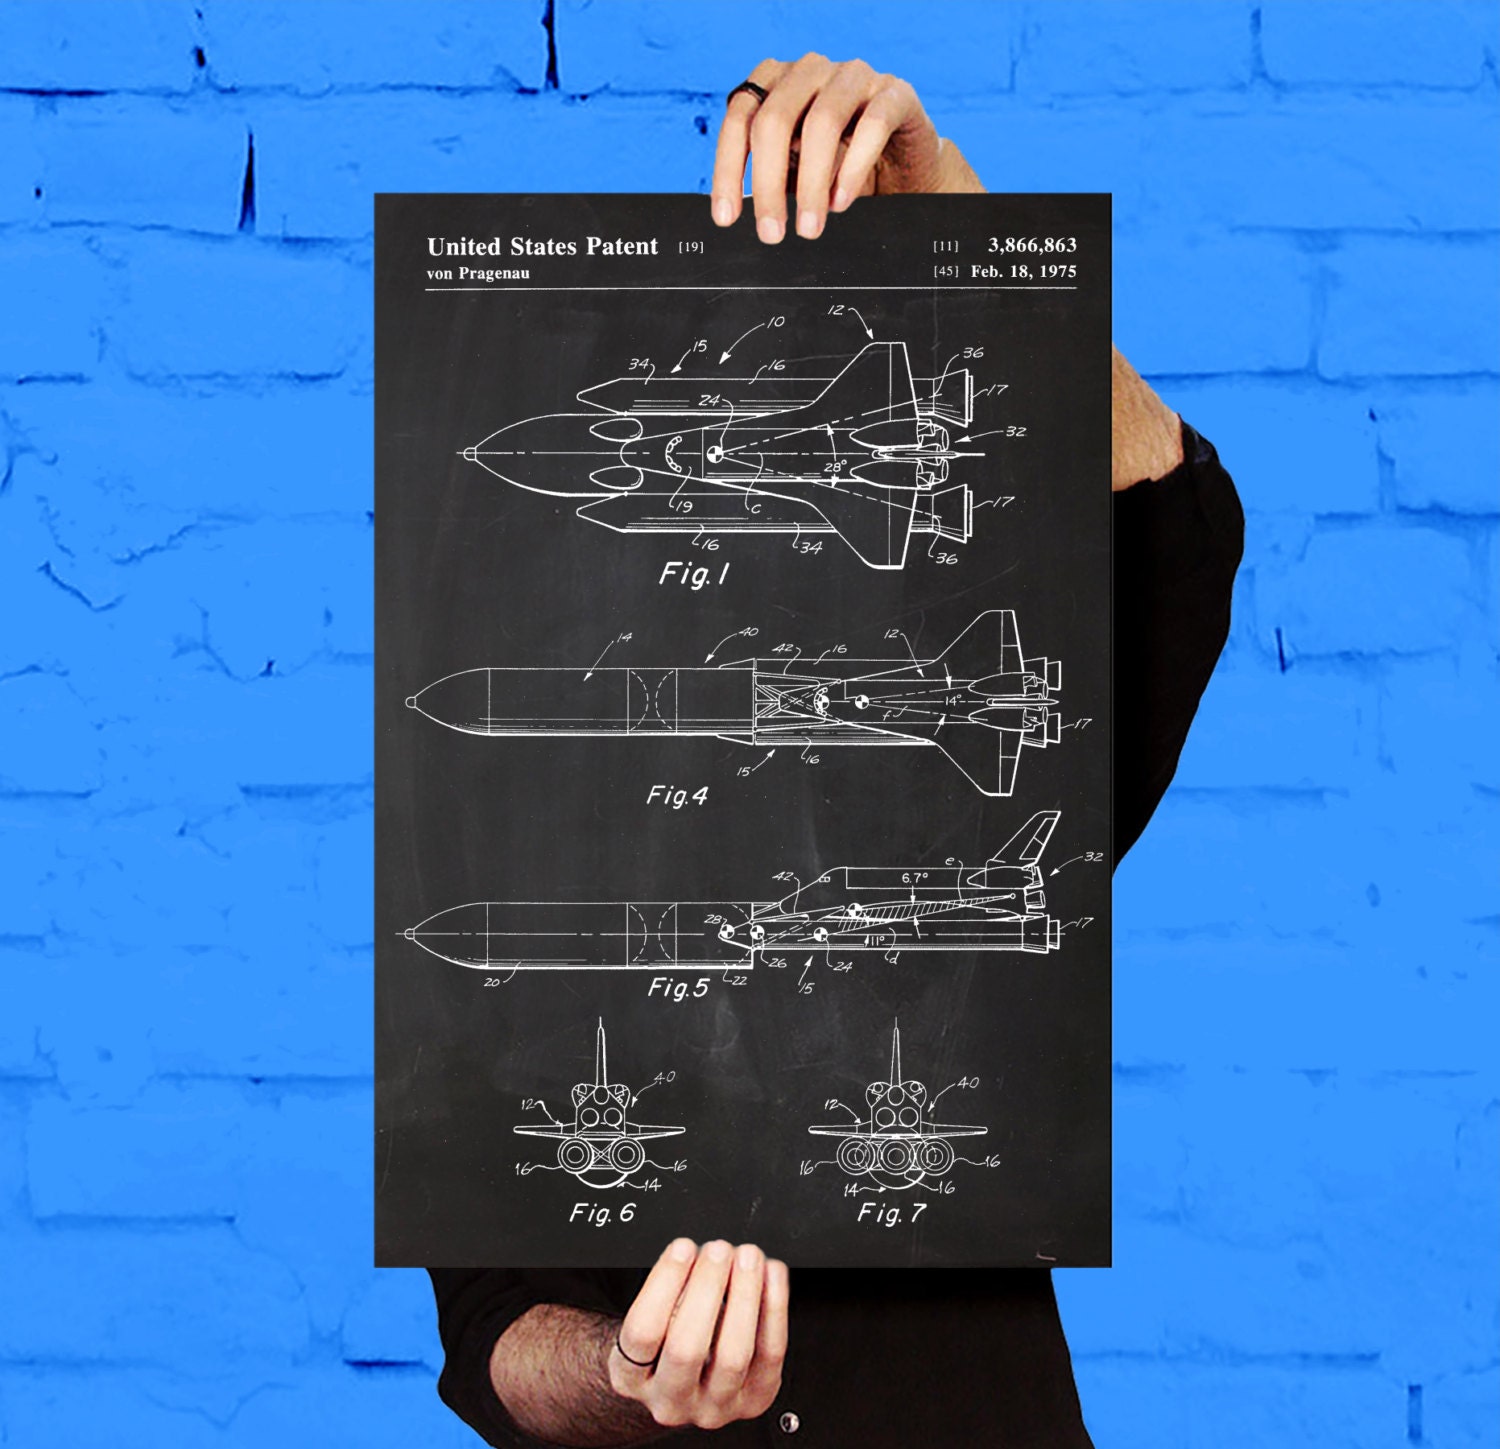 nasa space shuttle posters